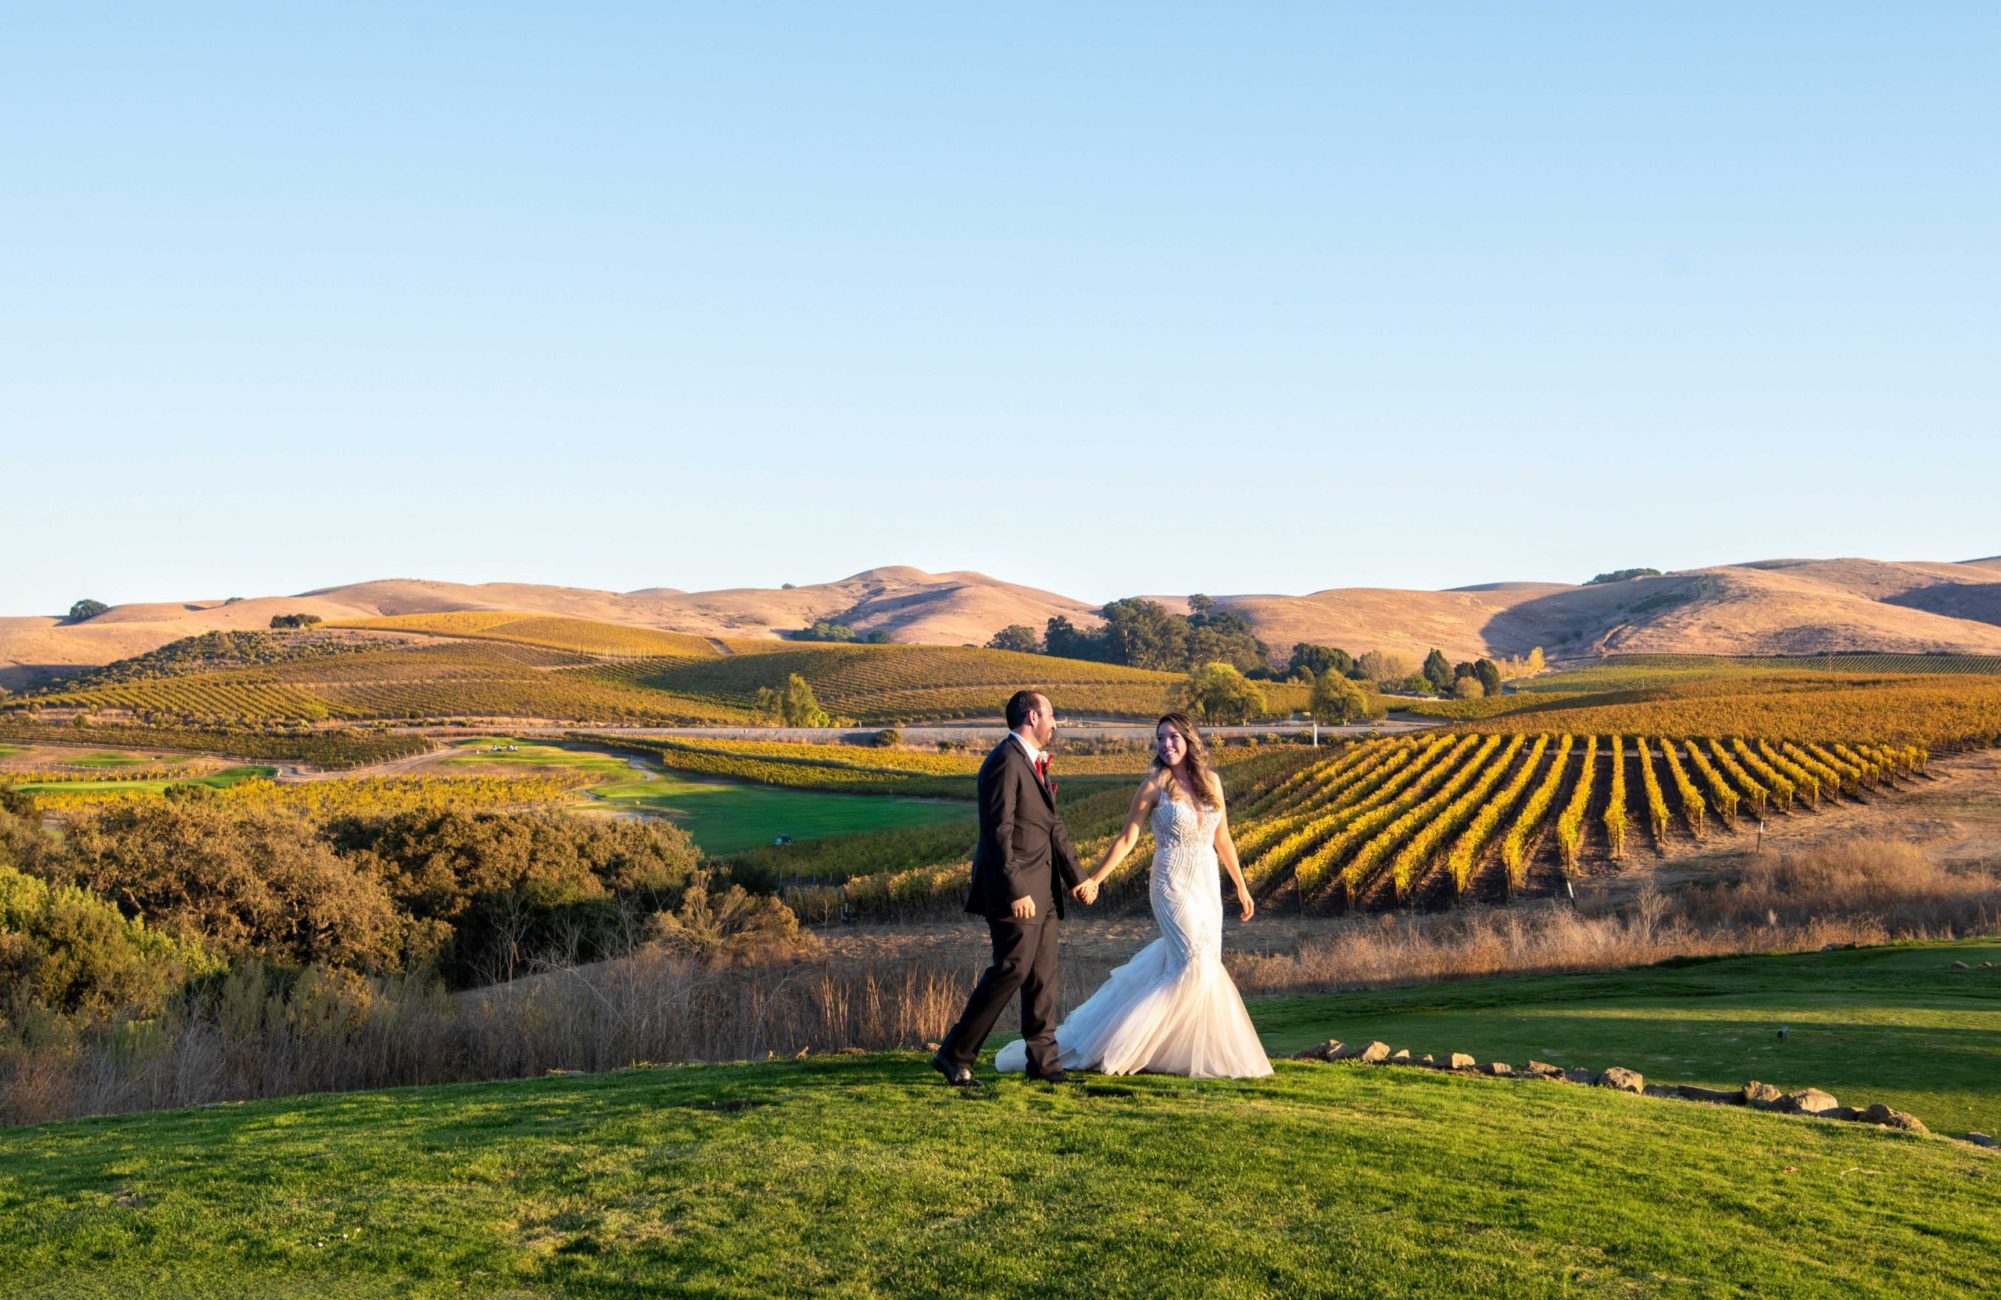 Elope in wine country